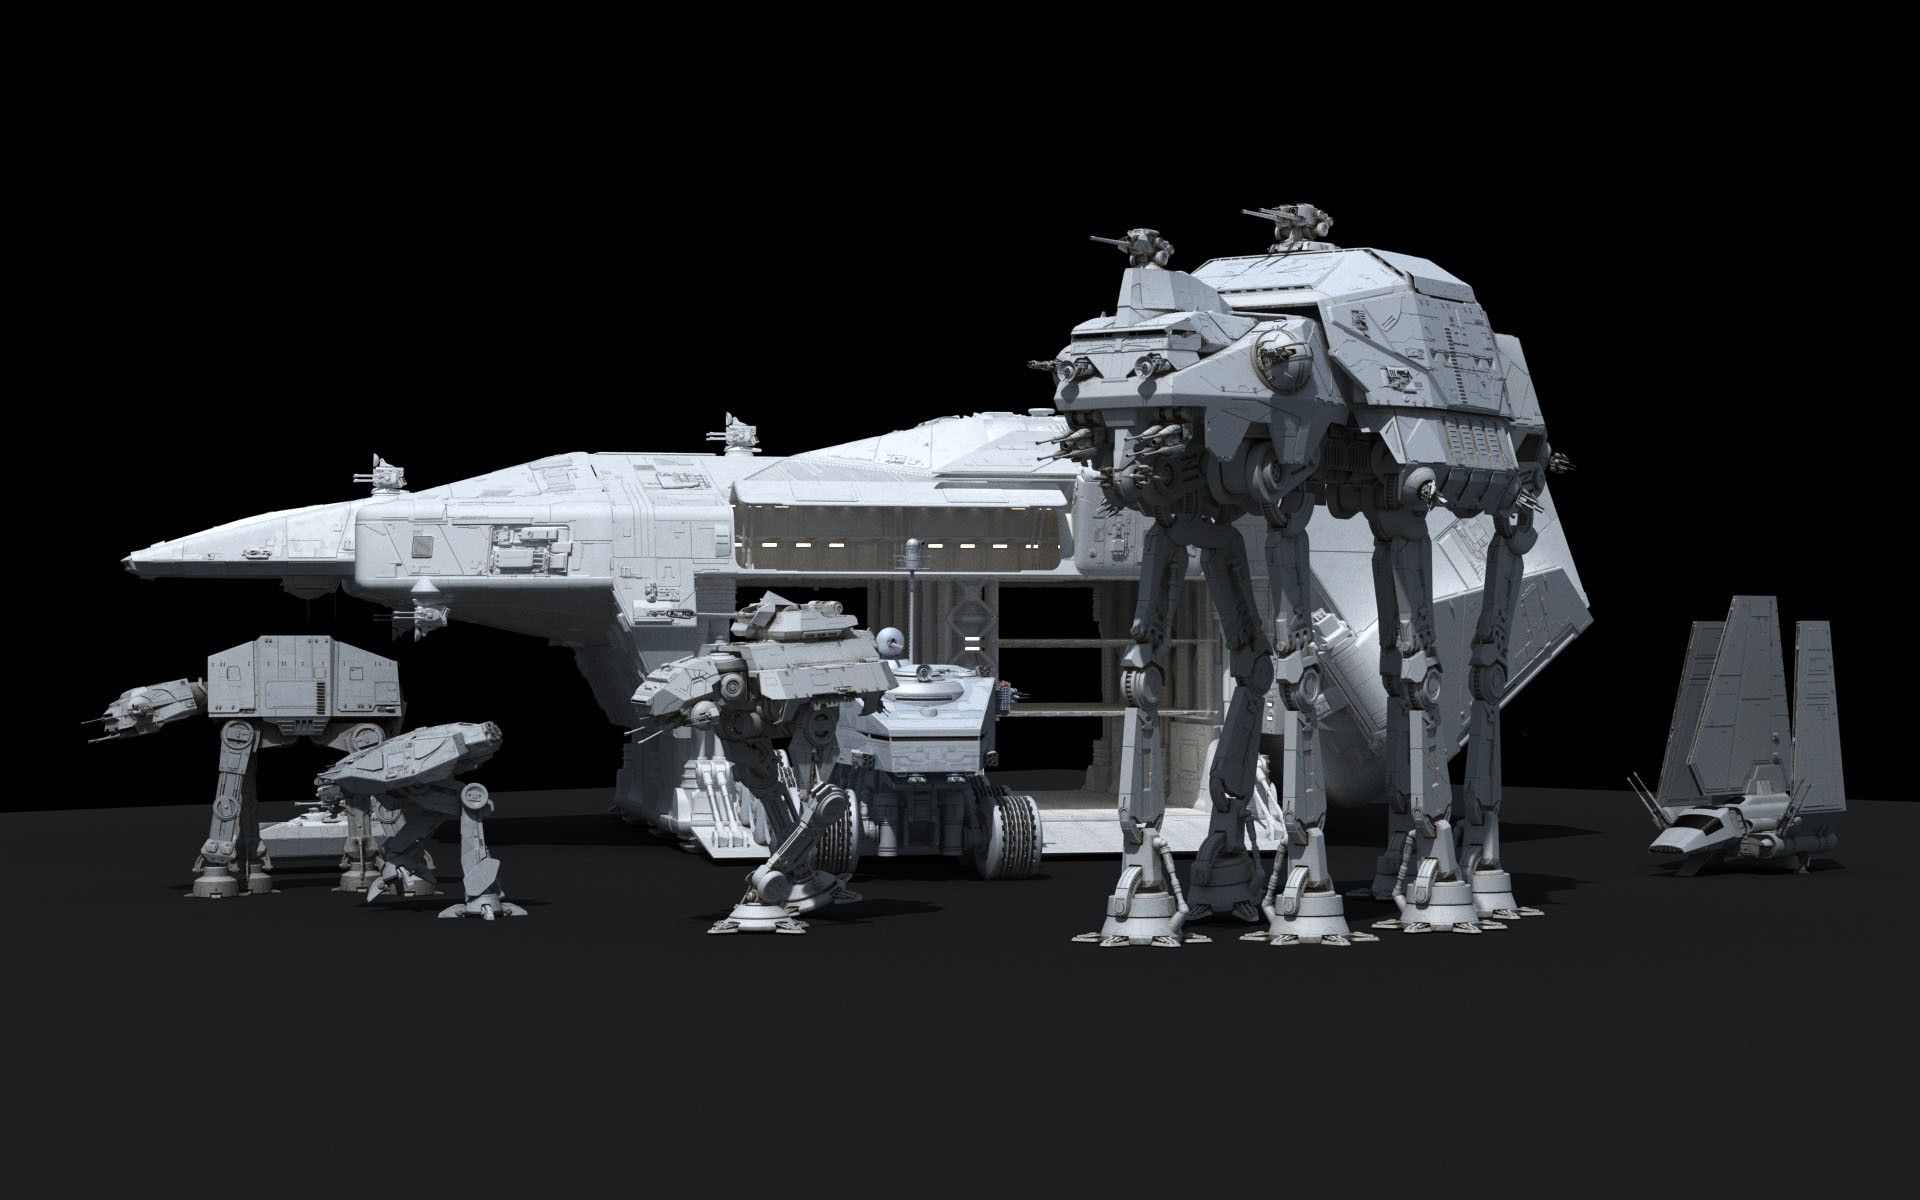 A collection of ground vehicles I've done so far. Star wars ships, Star wars empire, Star wars vehicles